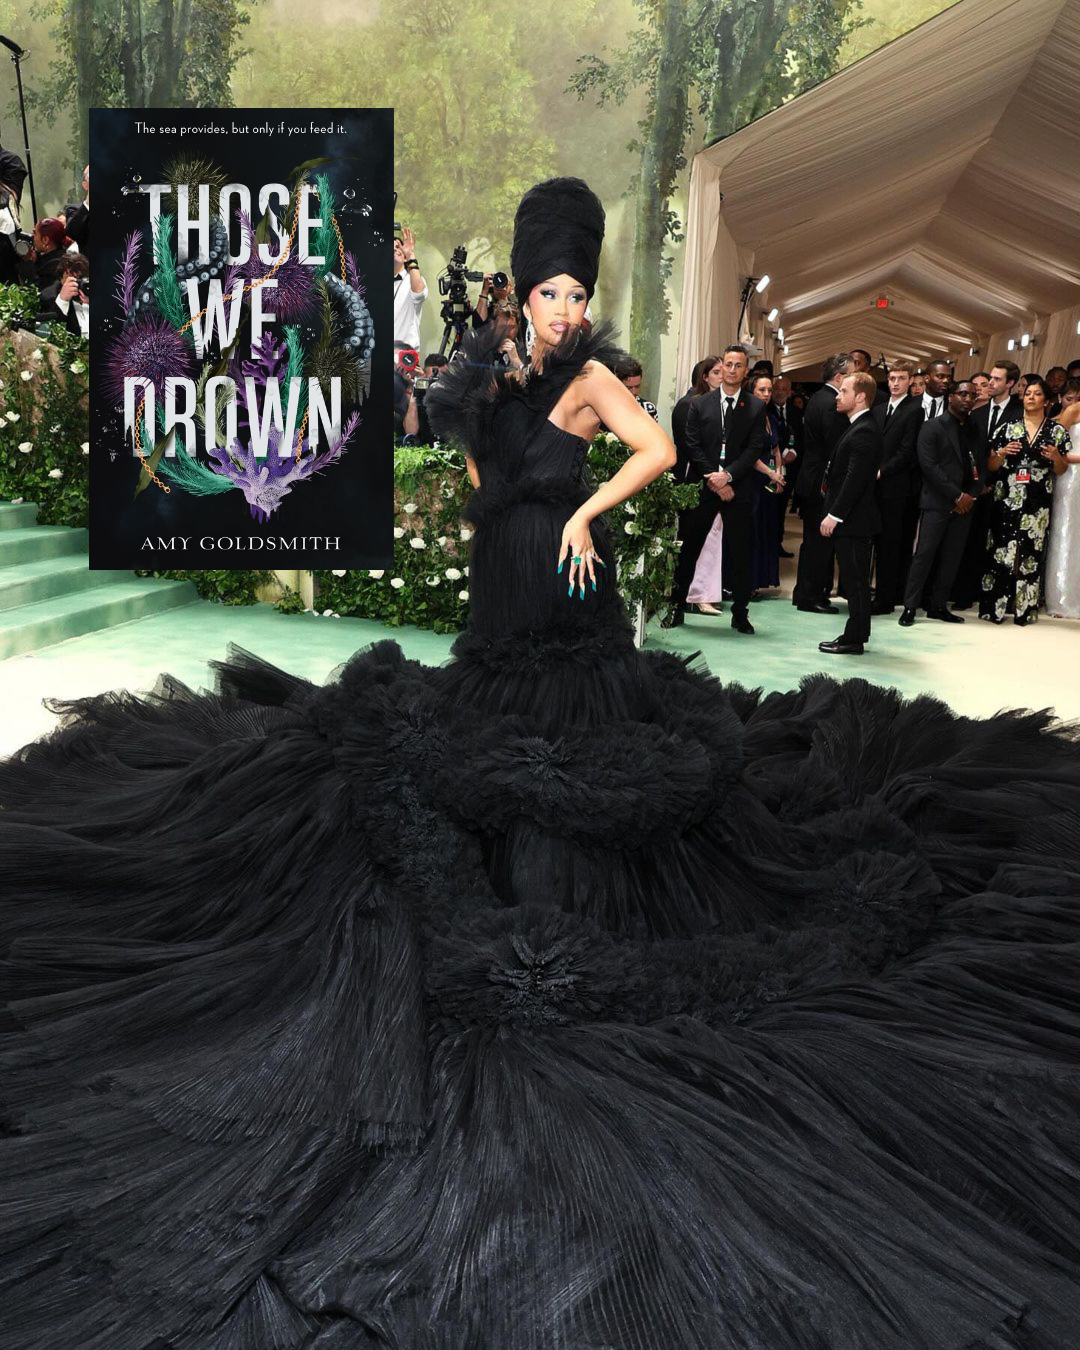 CardiB's gown looks ready to swallow you up, just like the cover of THOSE WE DROWN. (Photo credit: @poststyle on Instagram)